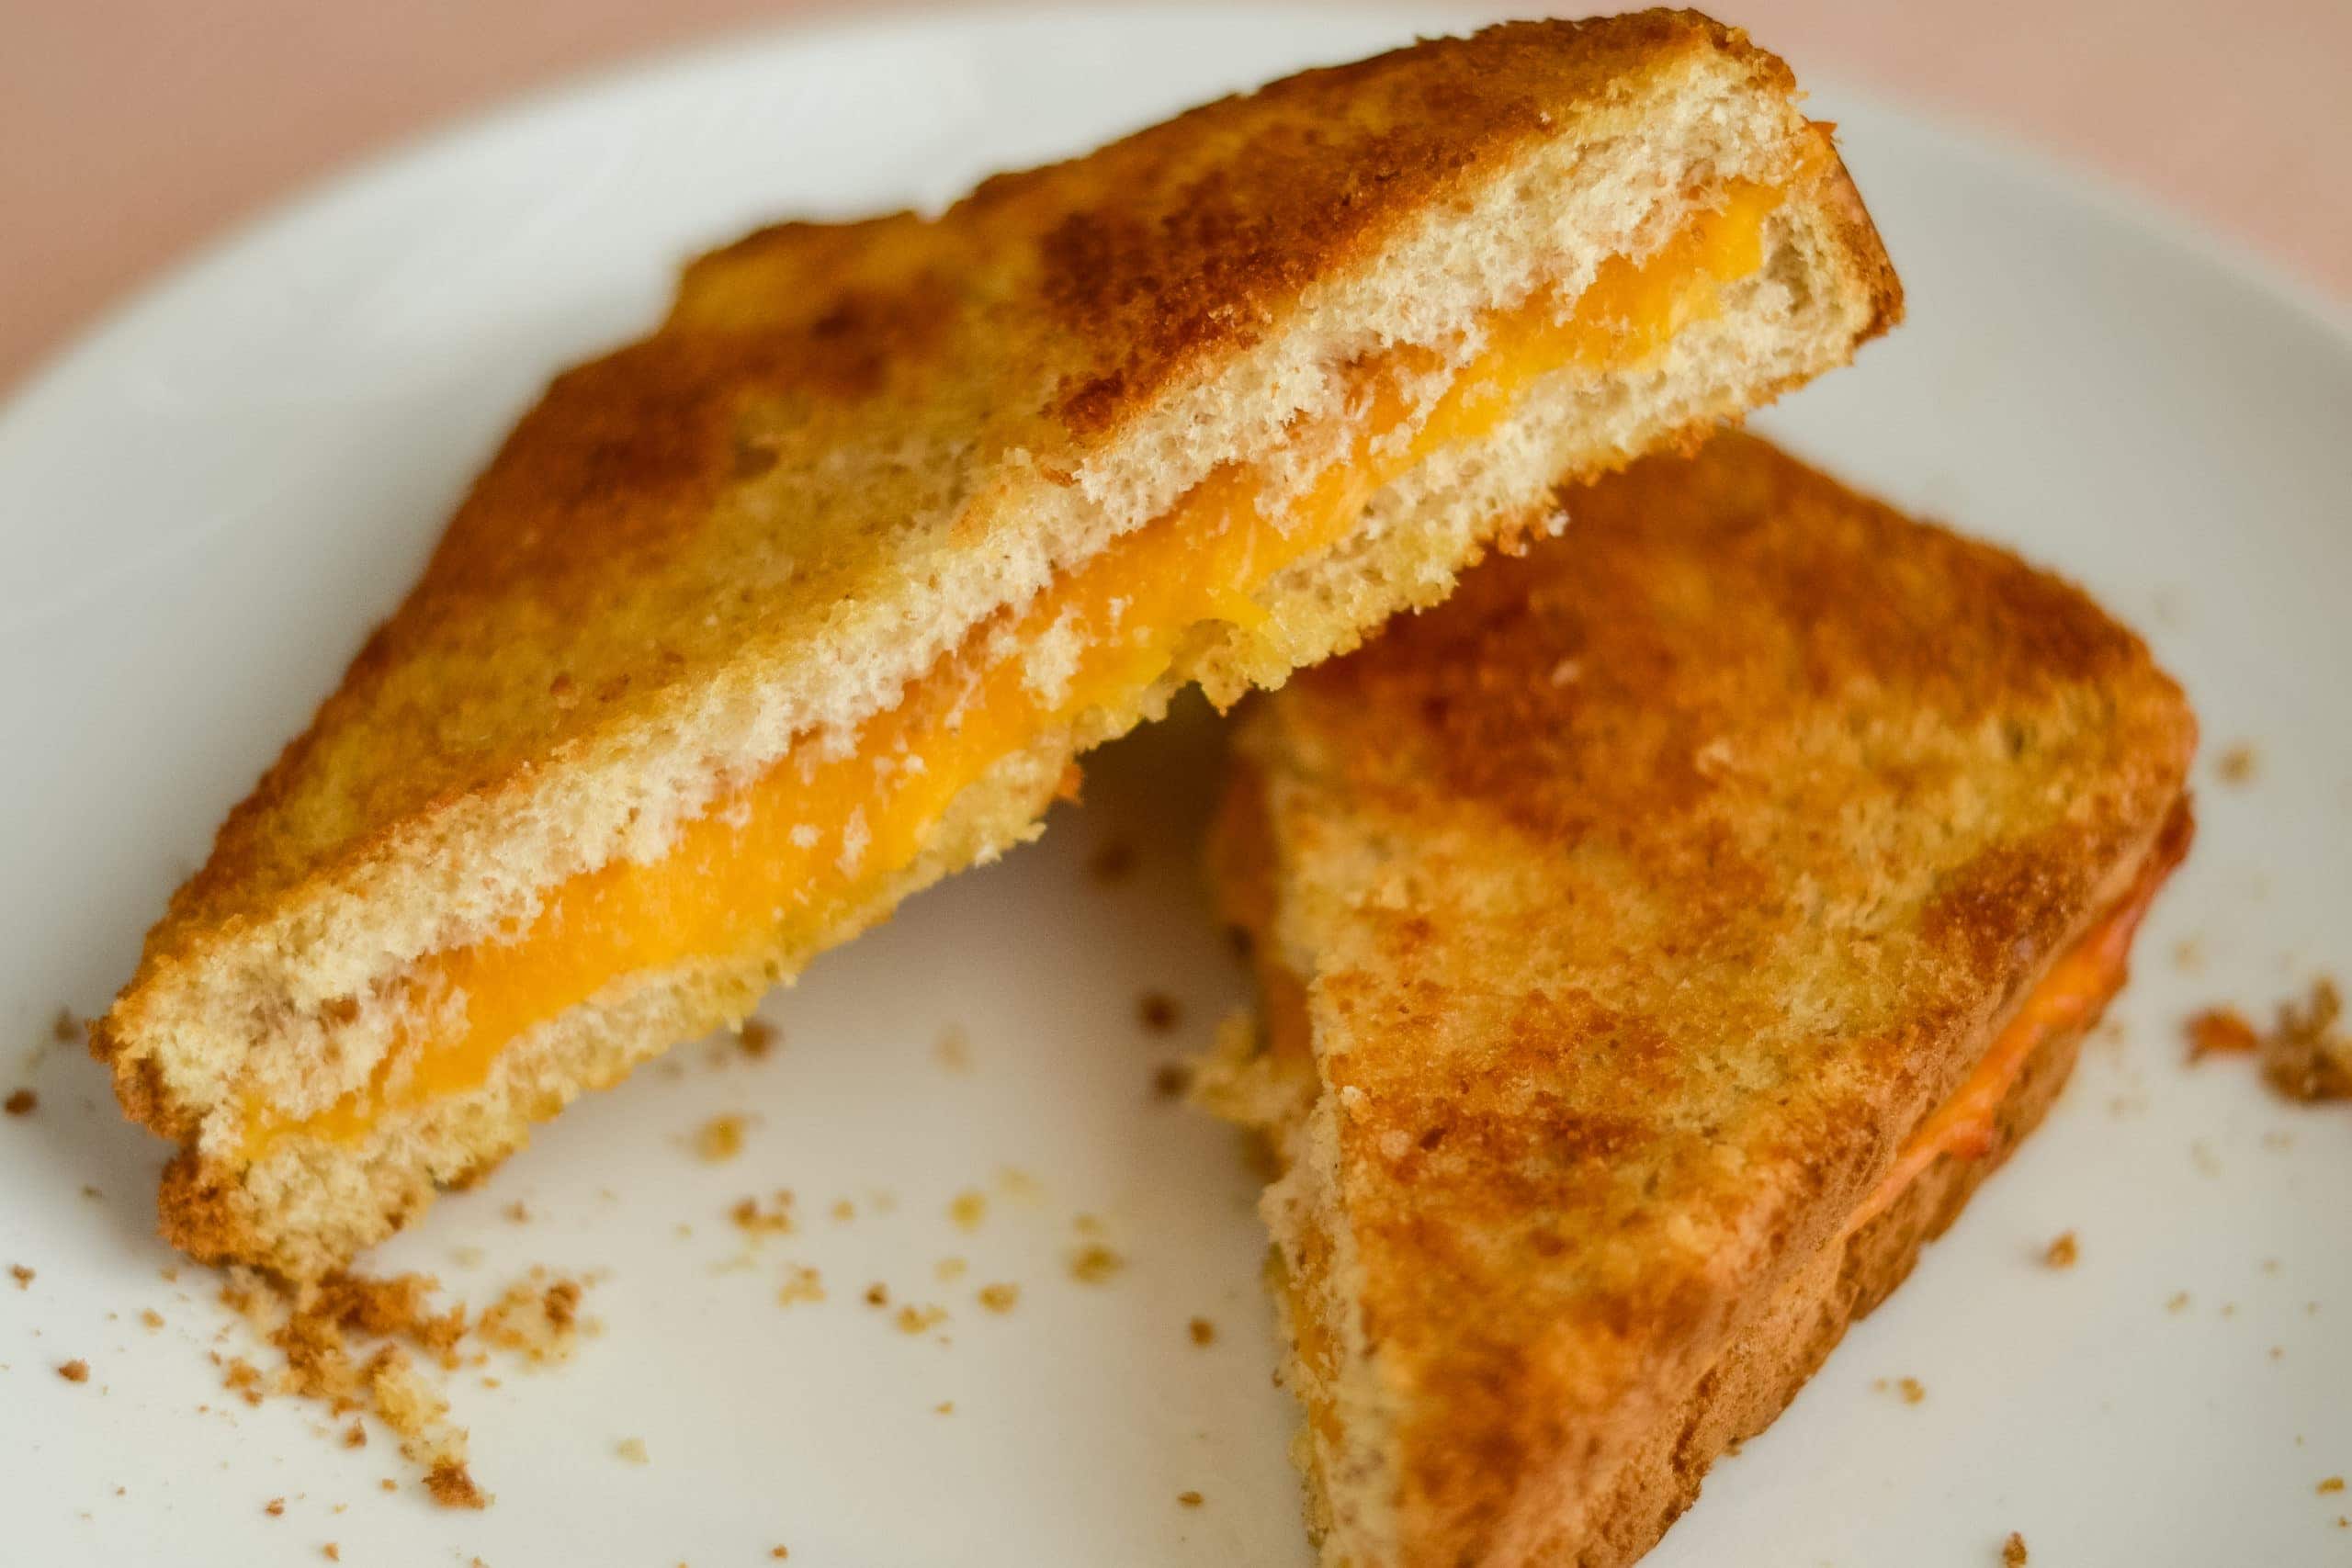 Easy Air Fryer Grilled Cheese